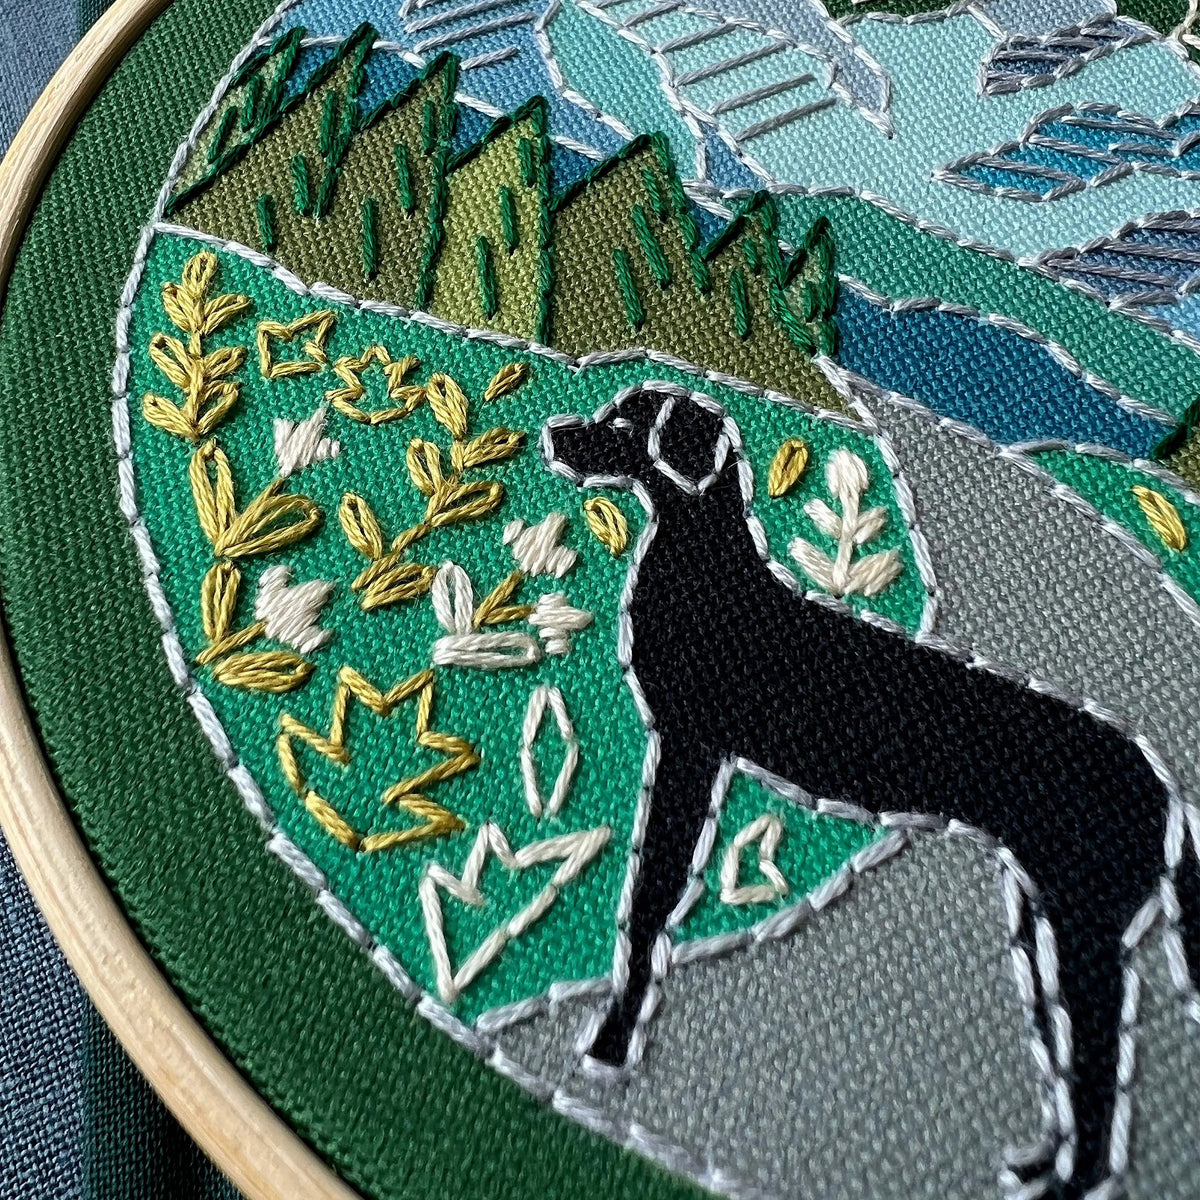 Trail Dog Hand Embroidery Kit